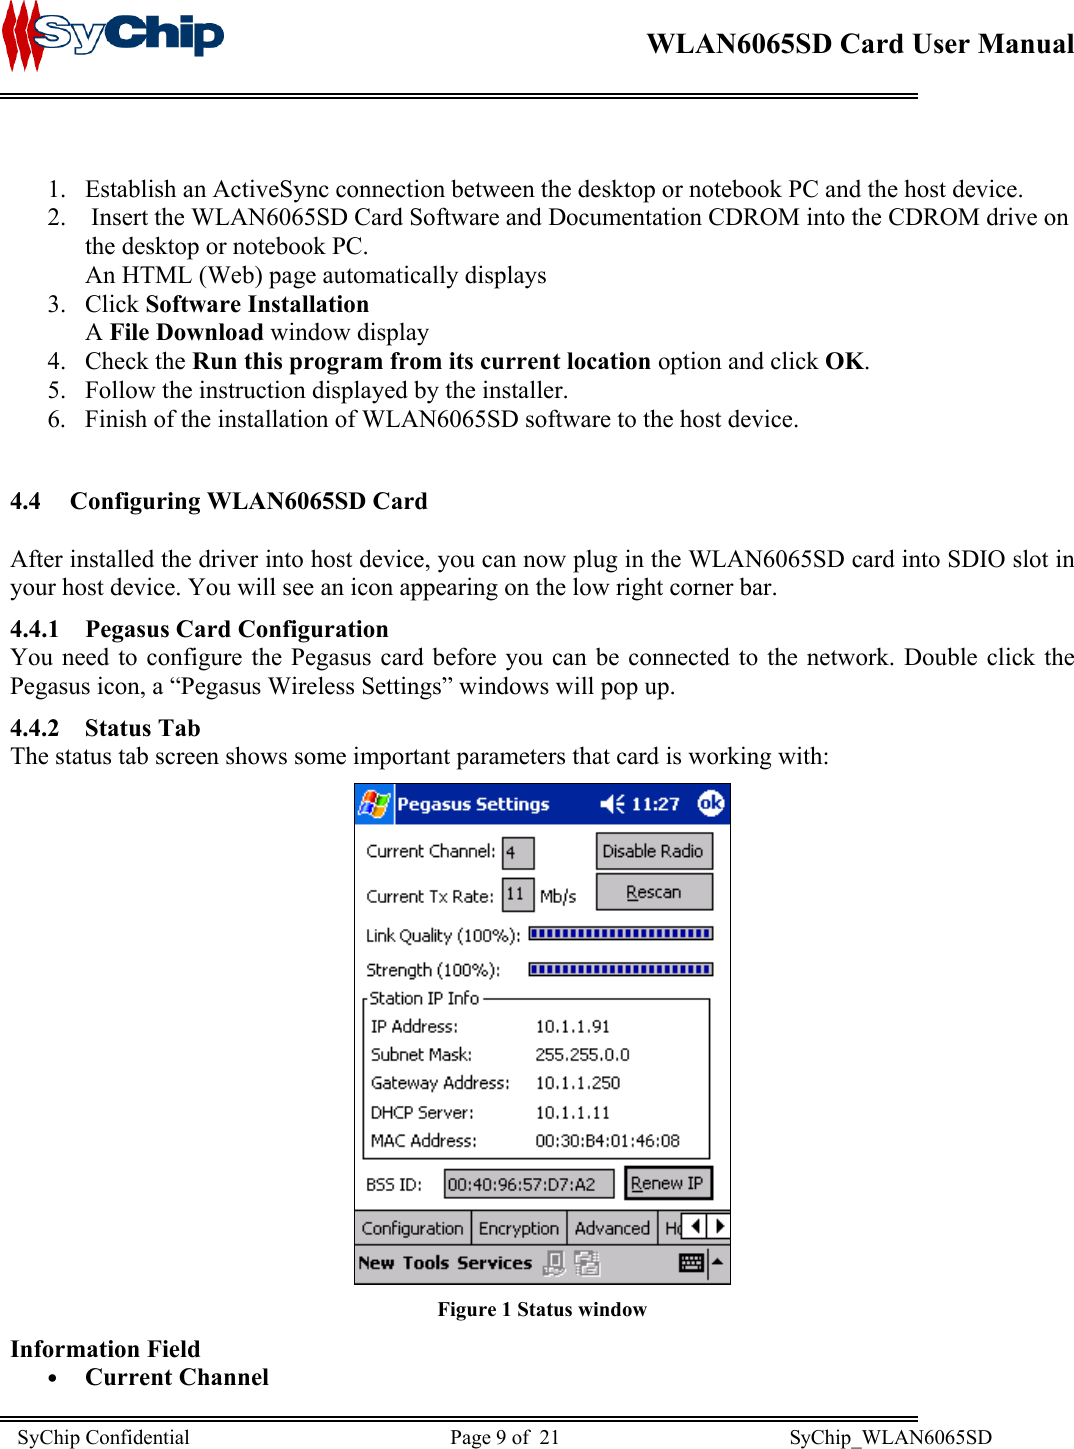    WLAN6065SD Card User Manual       1.  Establish an ActiveSync connection between the desktop or notebook PC and the host device. 2.  Insert the WLAN6065SD Card Software and Documentation CDROM into the CDROM drive on the desktop or notebook PC. An HTML (Web) page automatically displays 3. Click Software Installation A File Download window display 4. Check the Run this program from its current location option and click OK. 5.  Follow the instruction displayed by the installer. 6. Finish of the installation of WLAN6065SD software to the host device.  4.4 Configuring WLAN6065SD Card  After installed the driver into host device, you can now plug in the WLAN6065SD card into SDIO slot in your host device. You will see an icon appearing on the low right corner bar. 4.4.1  Pegasus Card Configuration You need to configure the Pegasus card before you can be connected to the network. Double click the Pegasus icon, a “Pegasus Wireless Settings” windows will pop up. 4.4.2 Status Tab The status tab screen shows some important parameters that card is working with:   Figure 1 Status window Information Field •  Current Channel SyChip Confidential                                                  Page 9 of  21                                            SyChip_WLAN6065SD                       